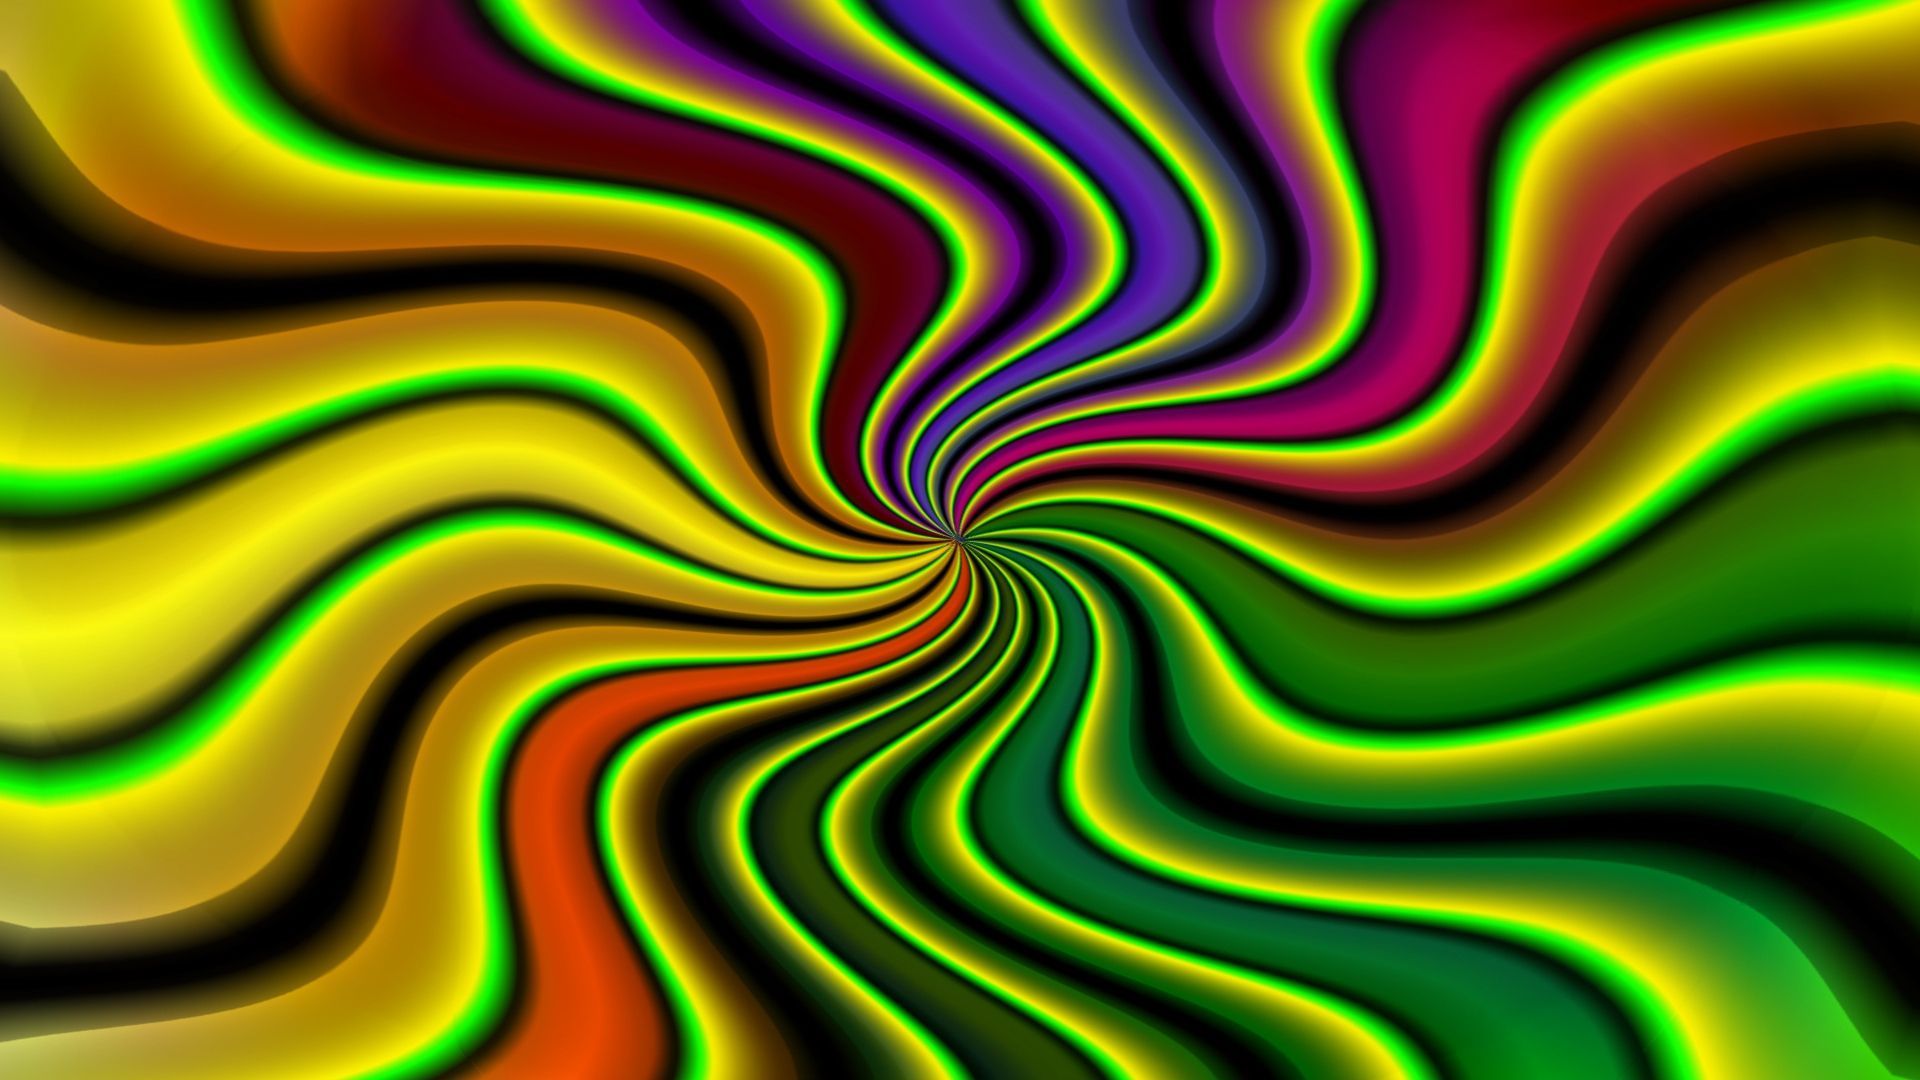 Download Wallpaper 1920x1080 Abstraction, Illusion, Colorful ...